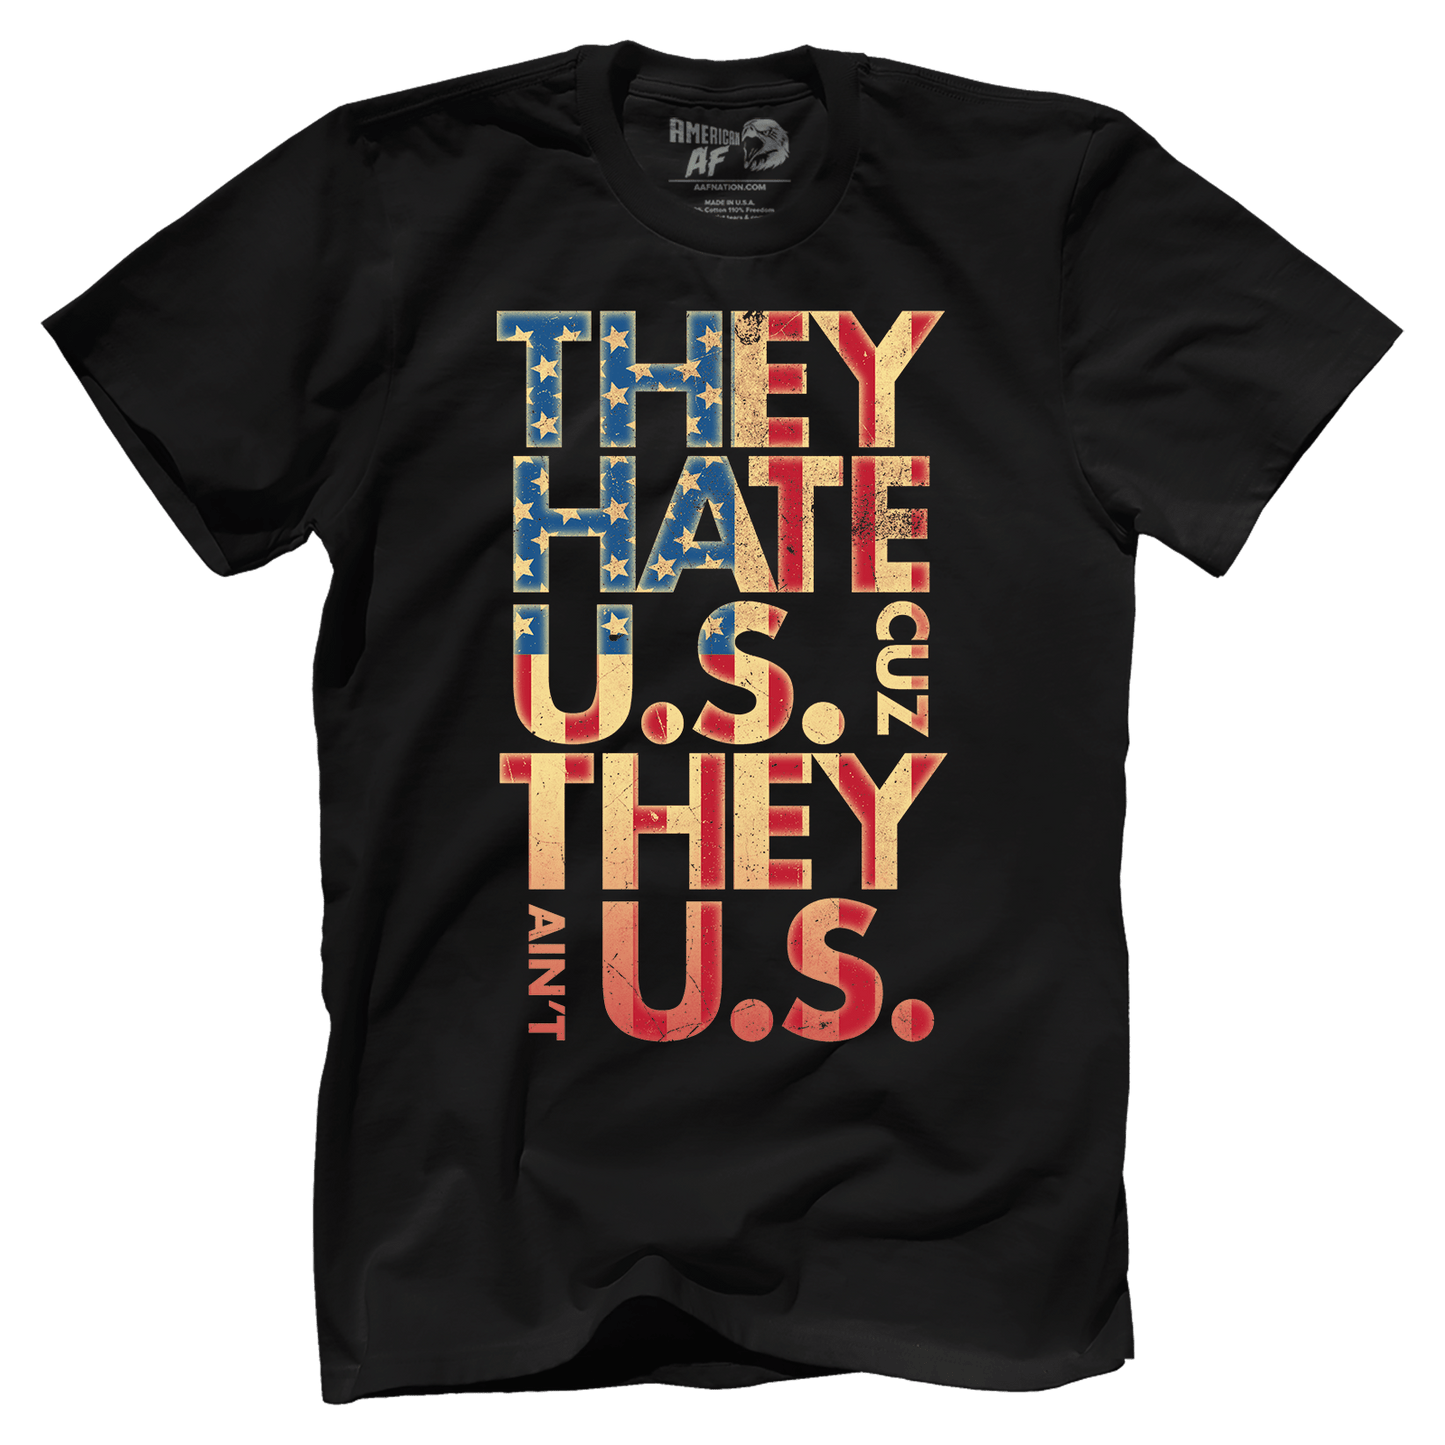 Apparel Premium Mens Shirt / Black / XS They Hate Us - August 2022 Club AAF Exclusive Design